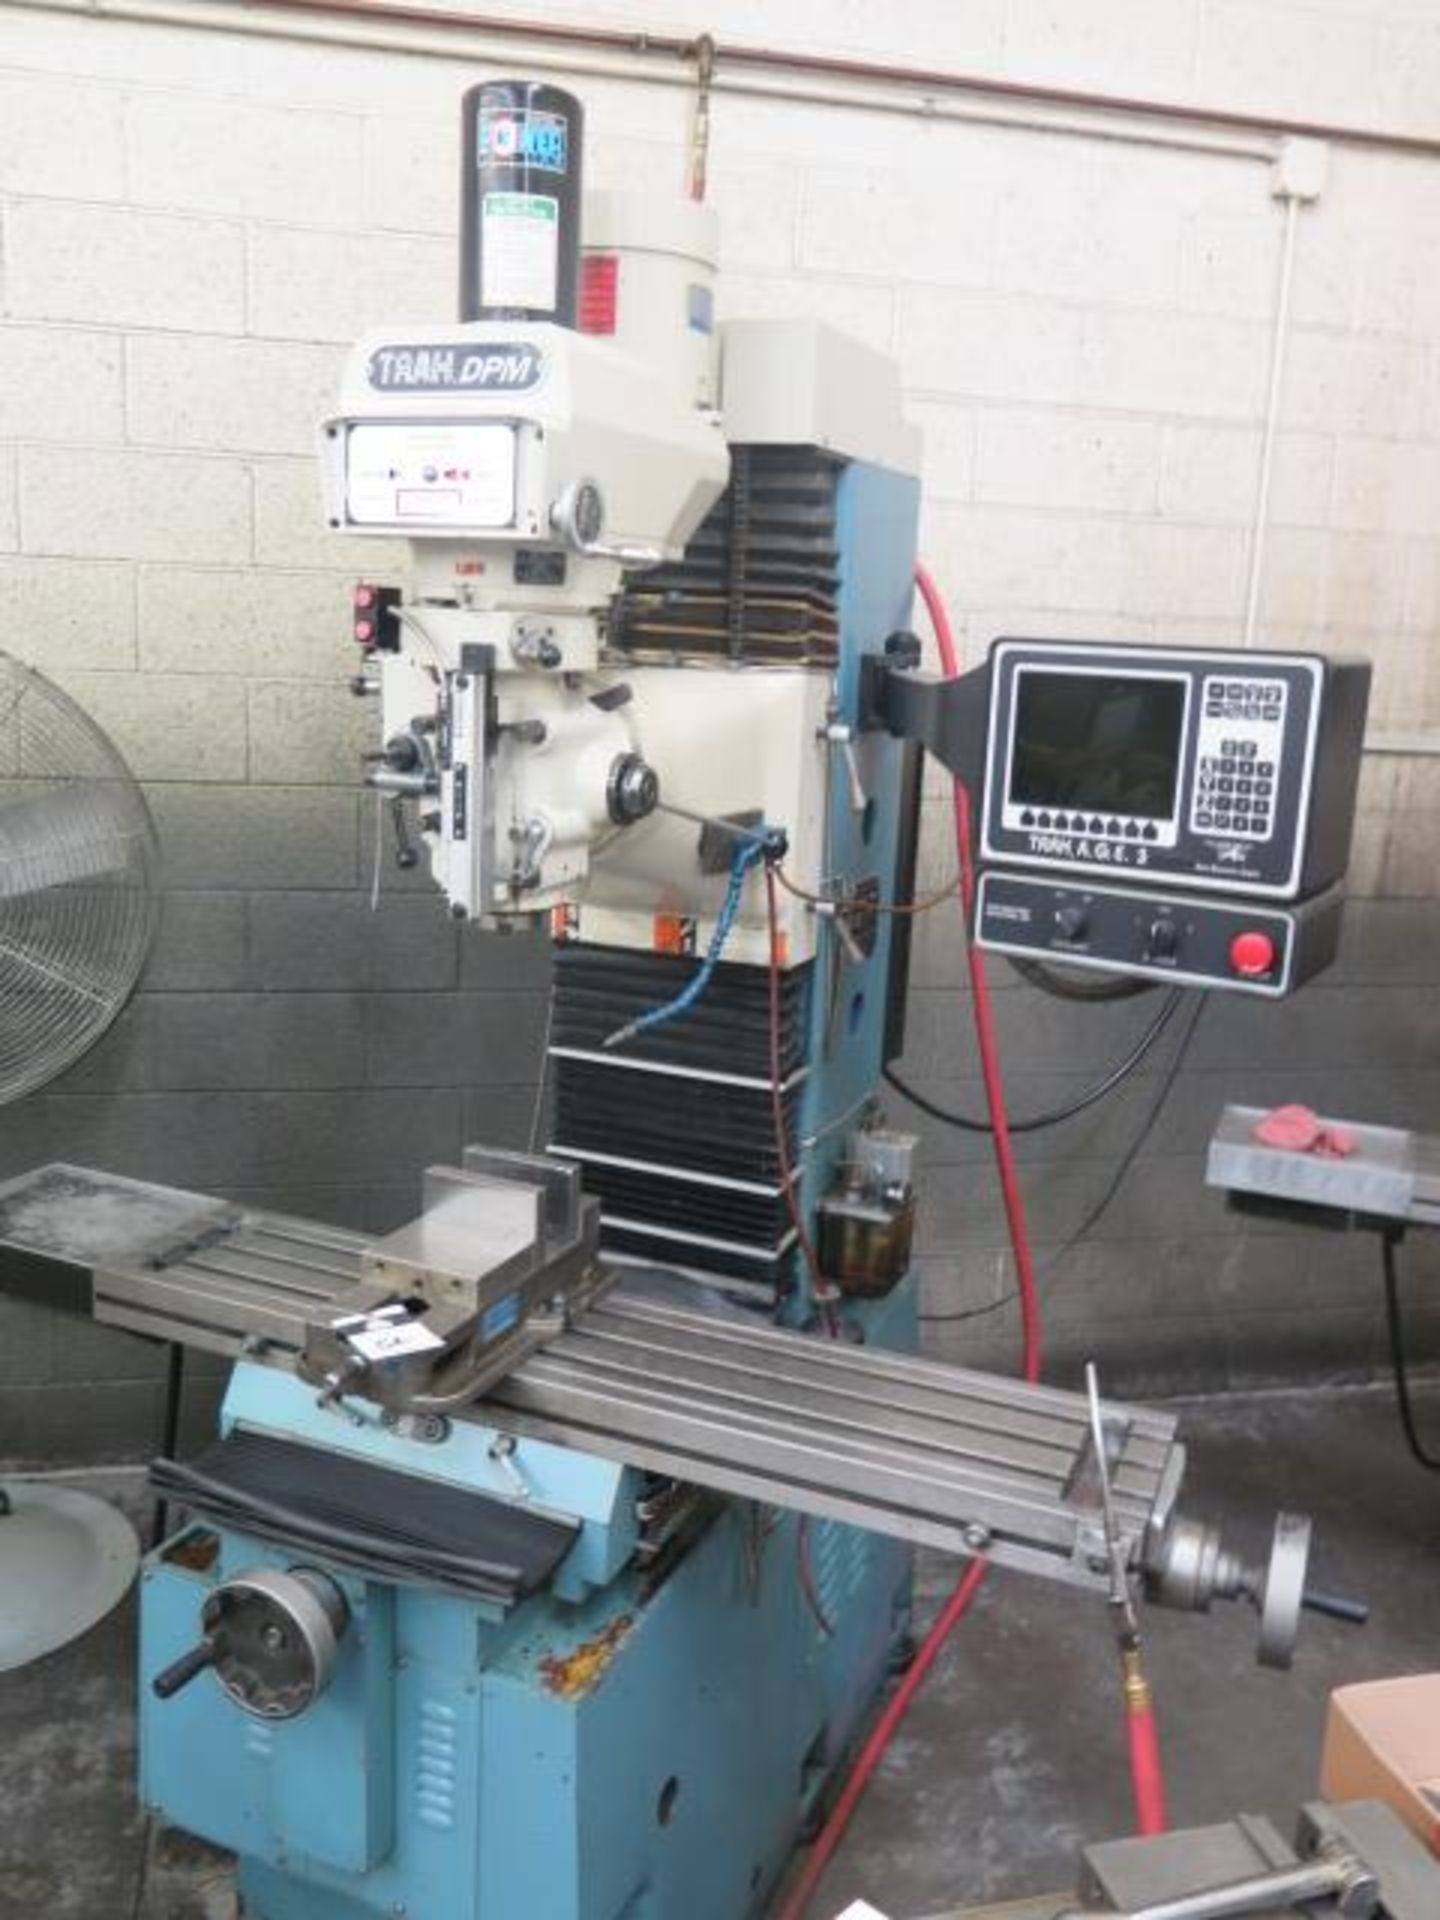 Southwestern Industries TRAK-DPM CNC Mill s/n 97-3095 w/ Proto Trak A.G.E 3 Controls, 3Hp,SOLD AS IS - Image 2 of 15